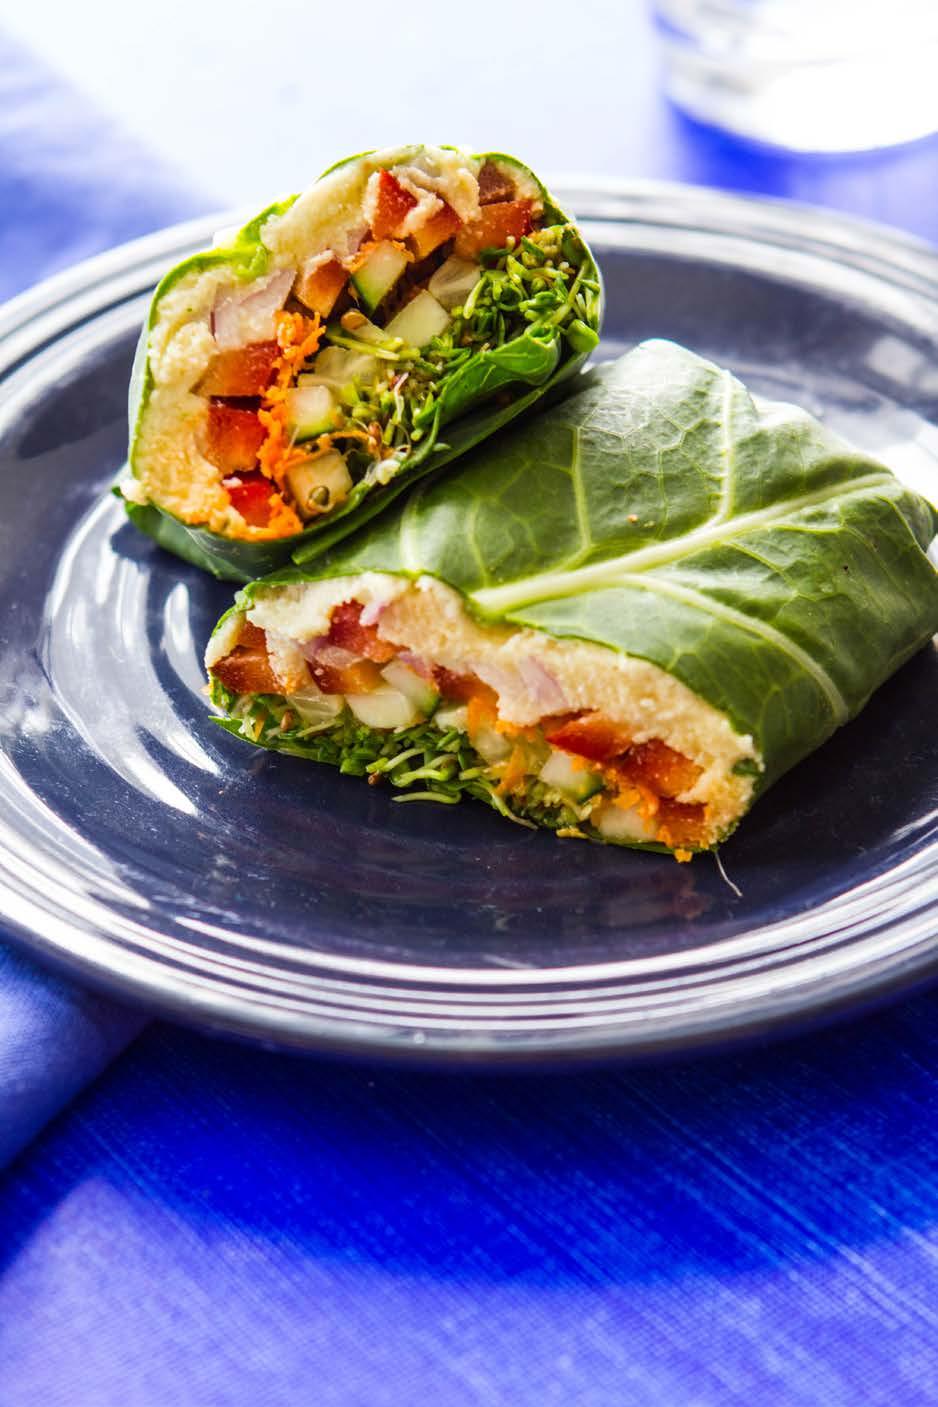 Wraps 10. Collard Hummus Wraps Forget the tortilla! You can make a delicious wrap that doesn t spike your blood sugar with energy-sapping gluten-laden carbs!